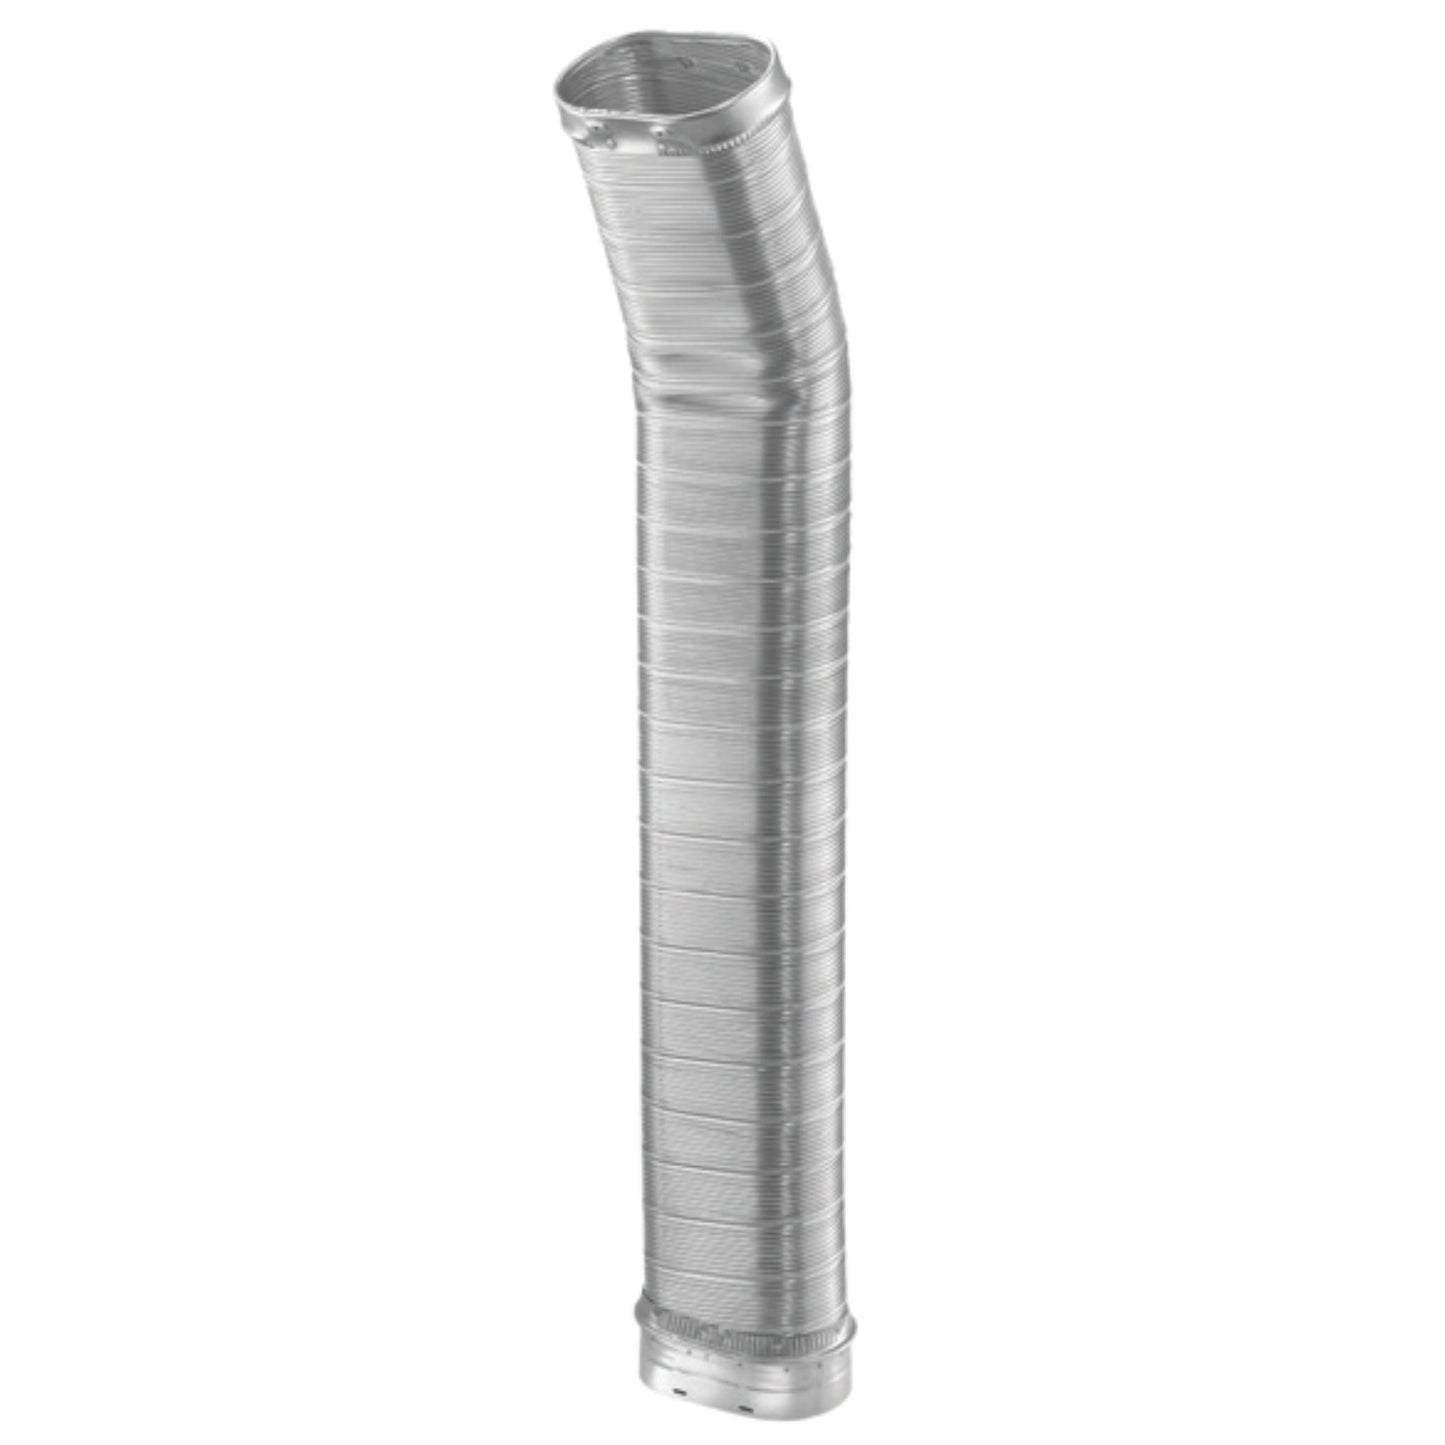 DuraVent DuraLiner 6" x 60" Oval-To-Oval Stainless Steel Flex Pipe